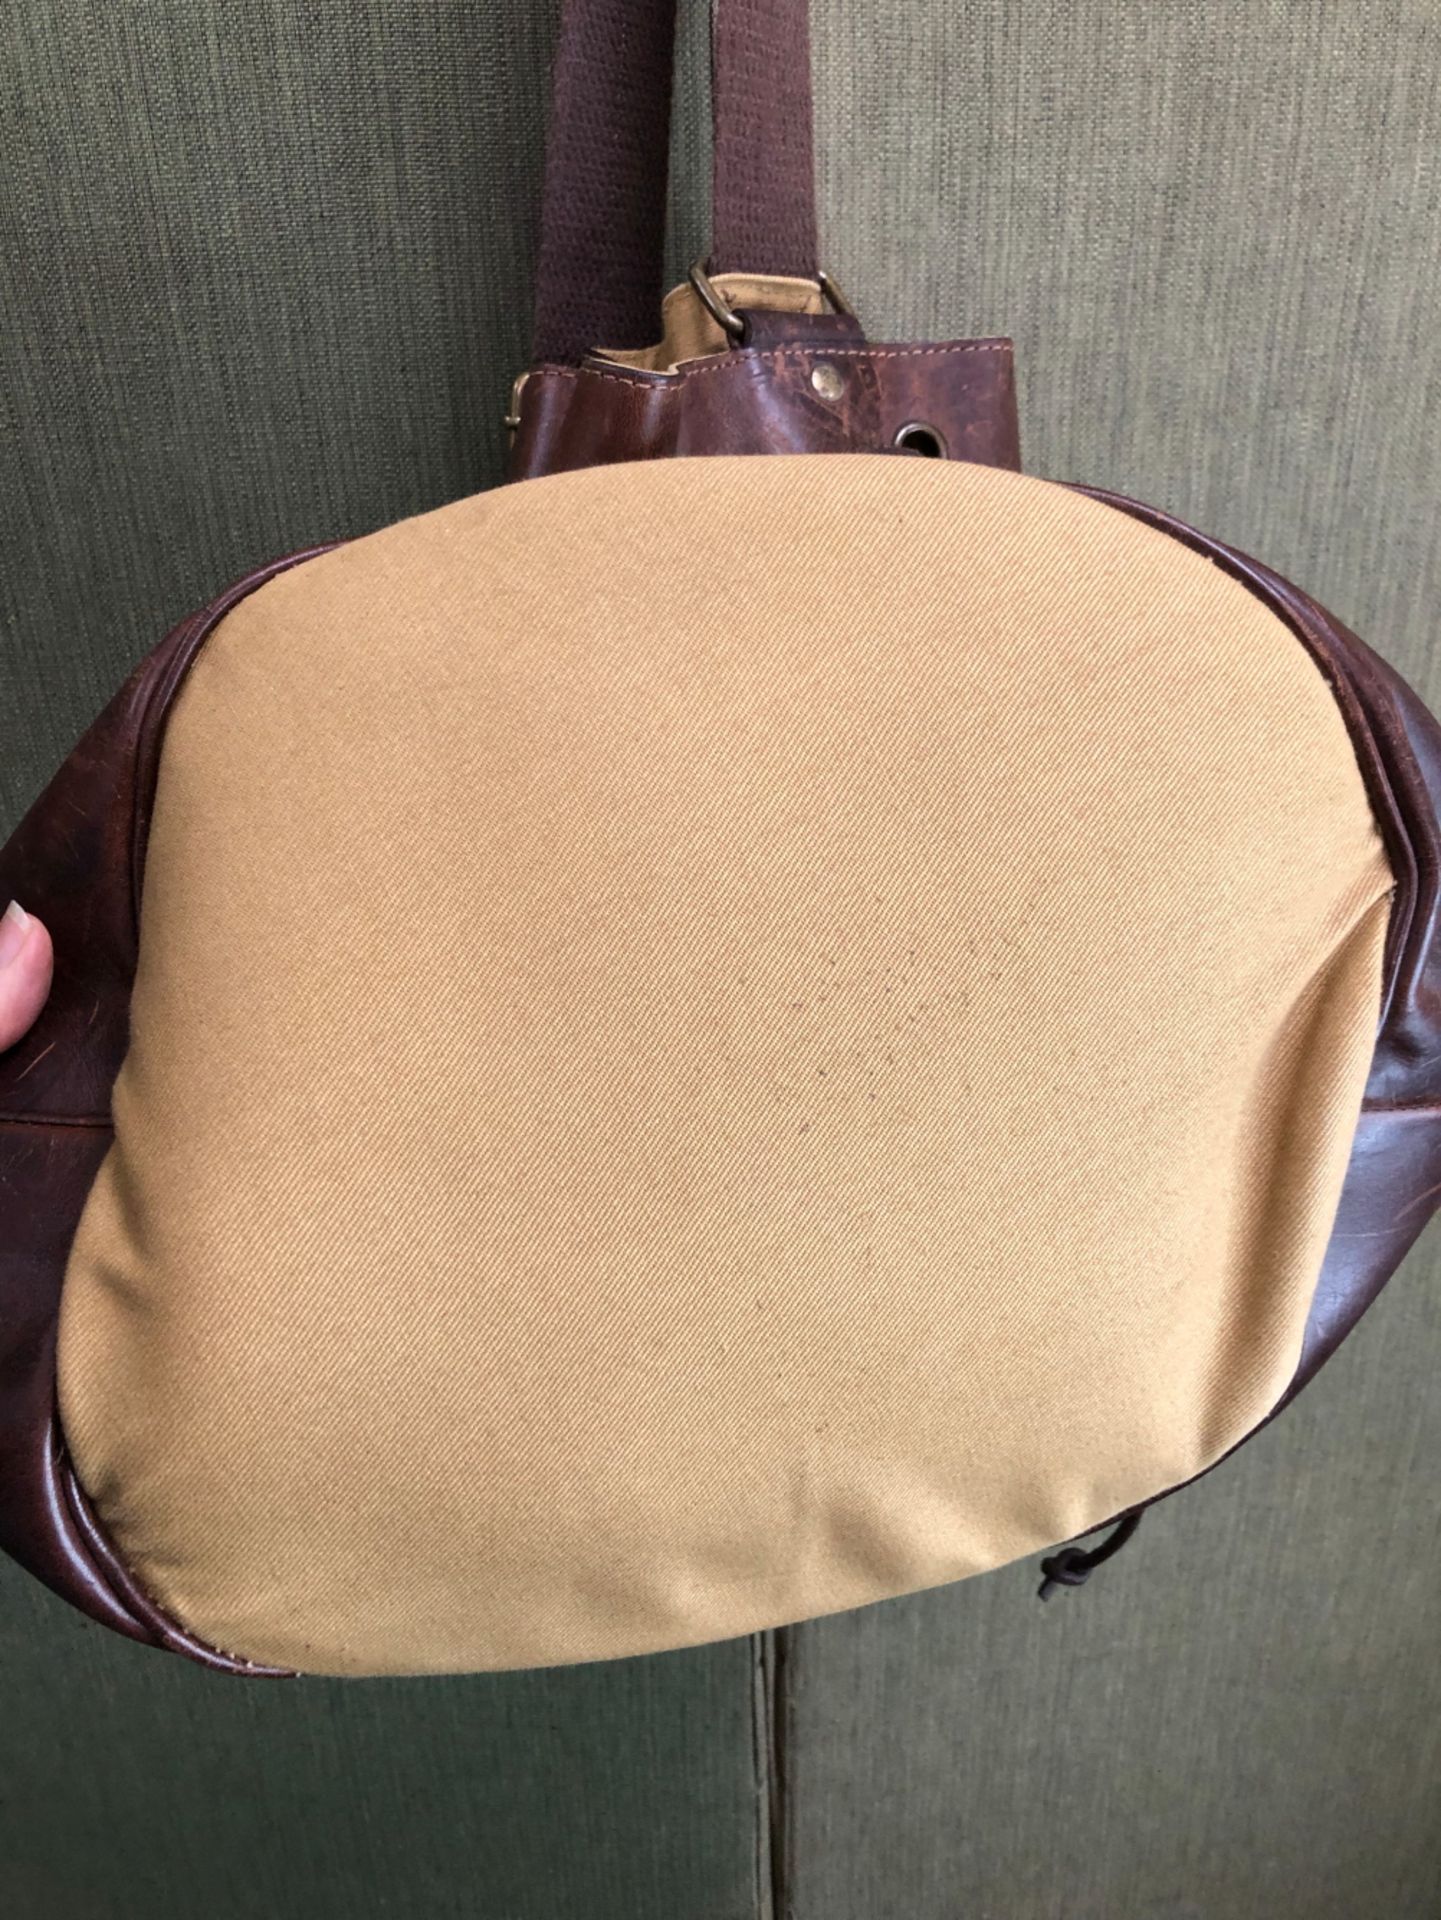 A THOMAS BURBERRY CANVAS BACK PACK. - Image 7 of 8